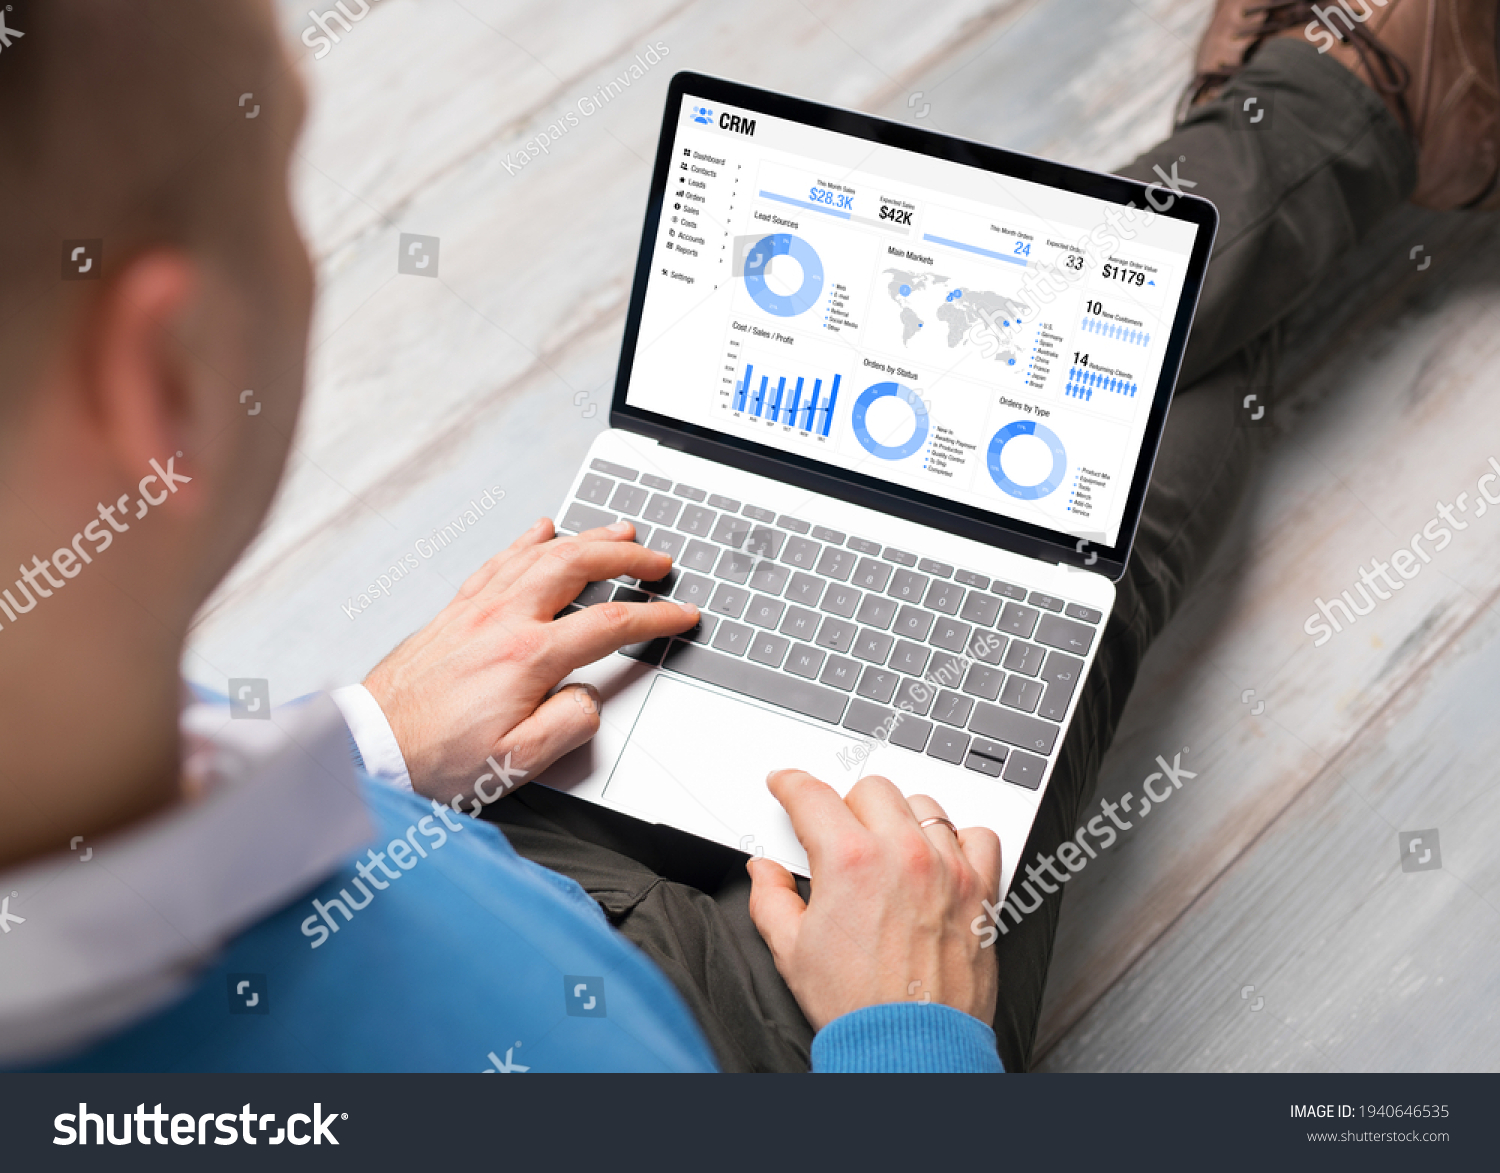 Man using CRM software on laptop with different graphs and charts showing sales data for his business #1940646535